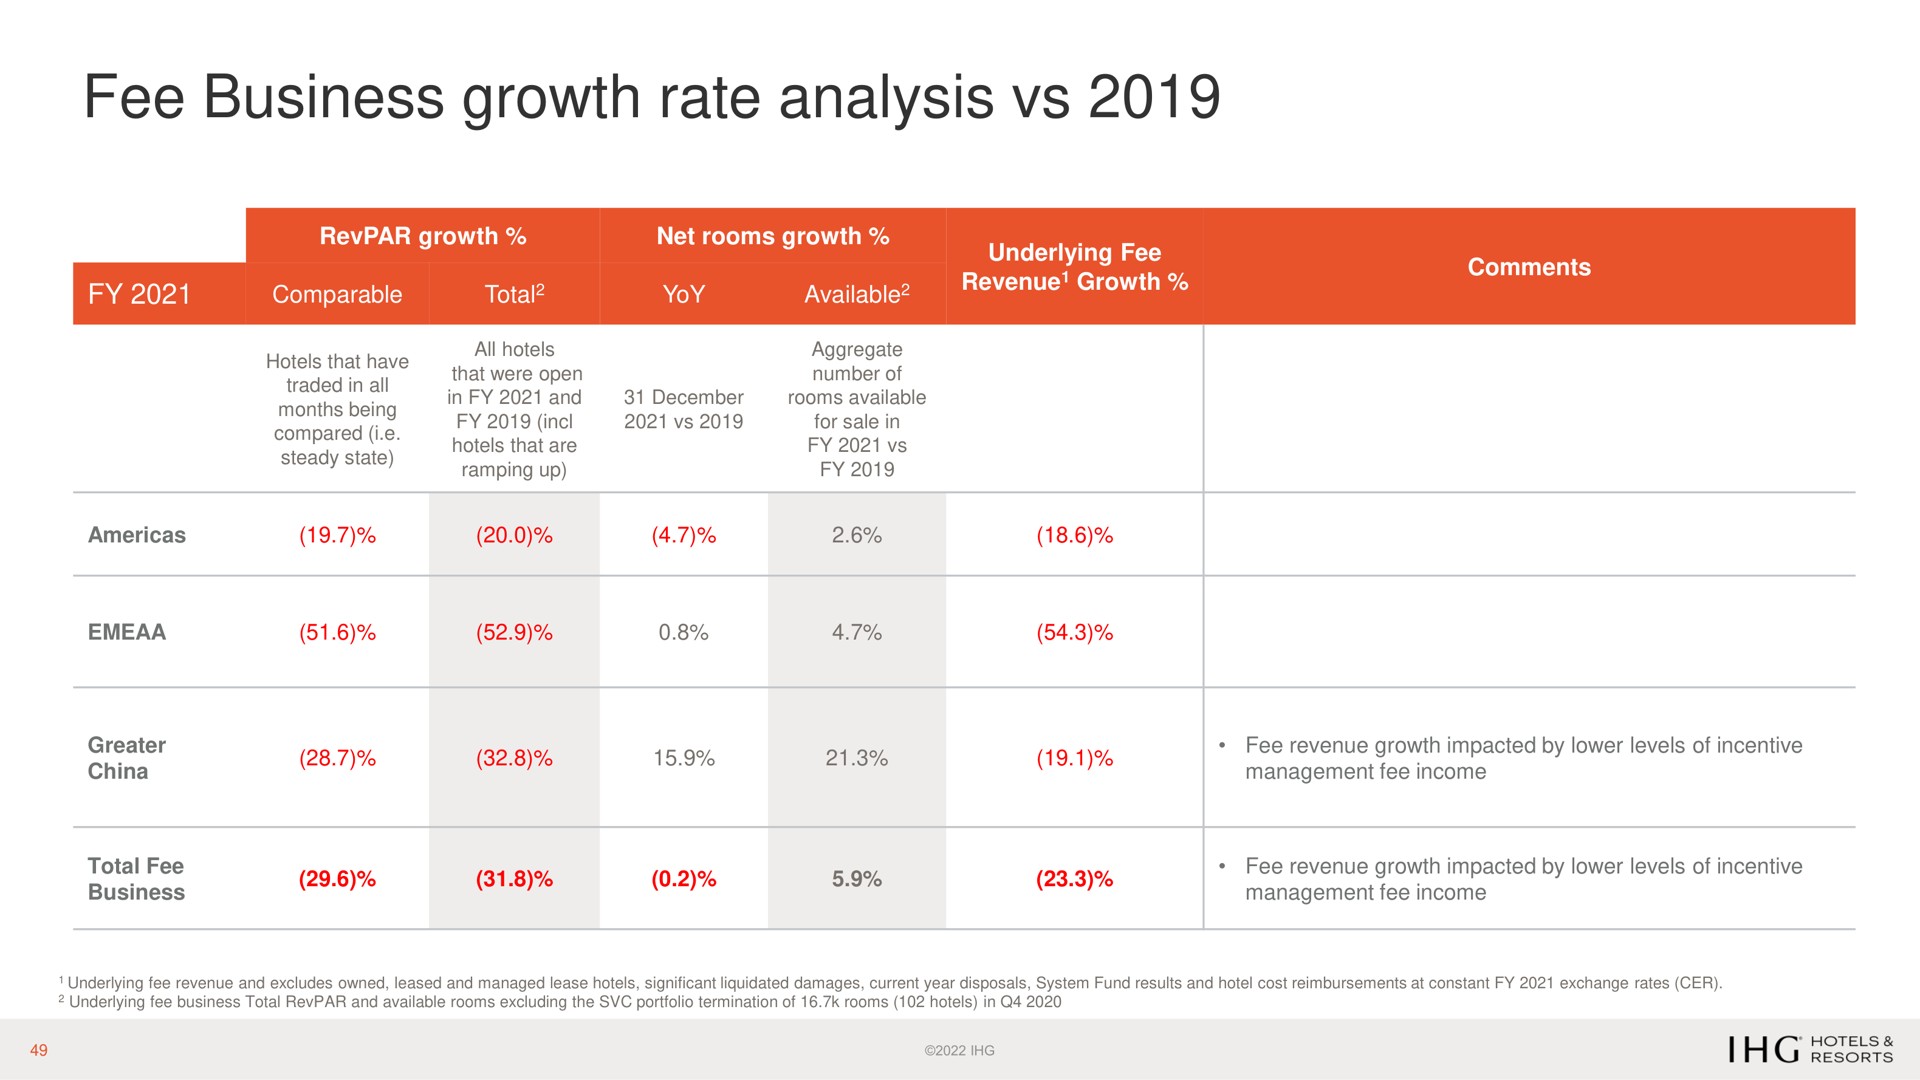 fee business growth rate analysis | IHG Hotels